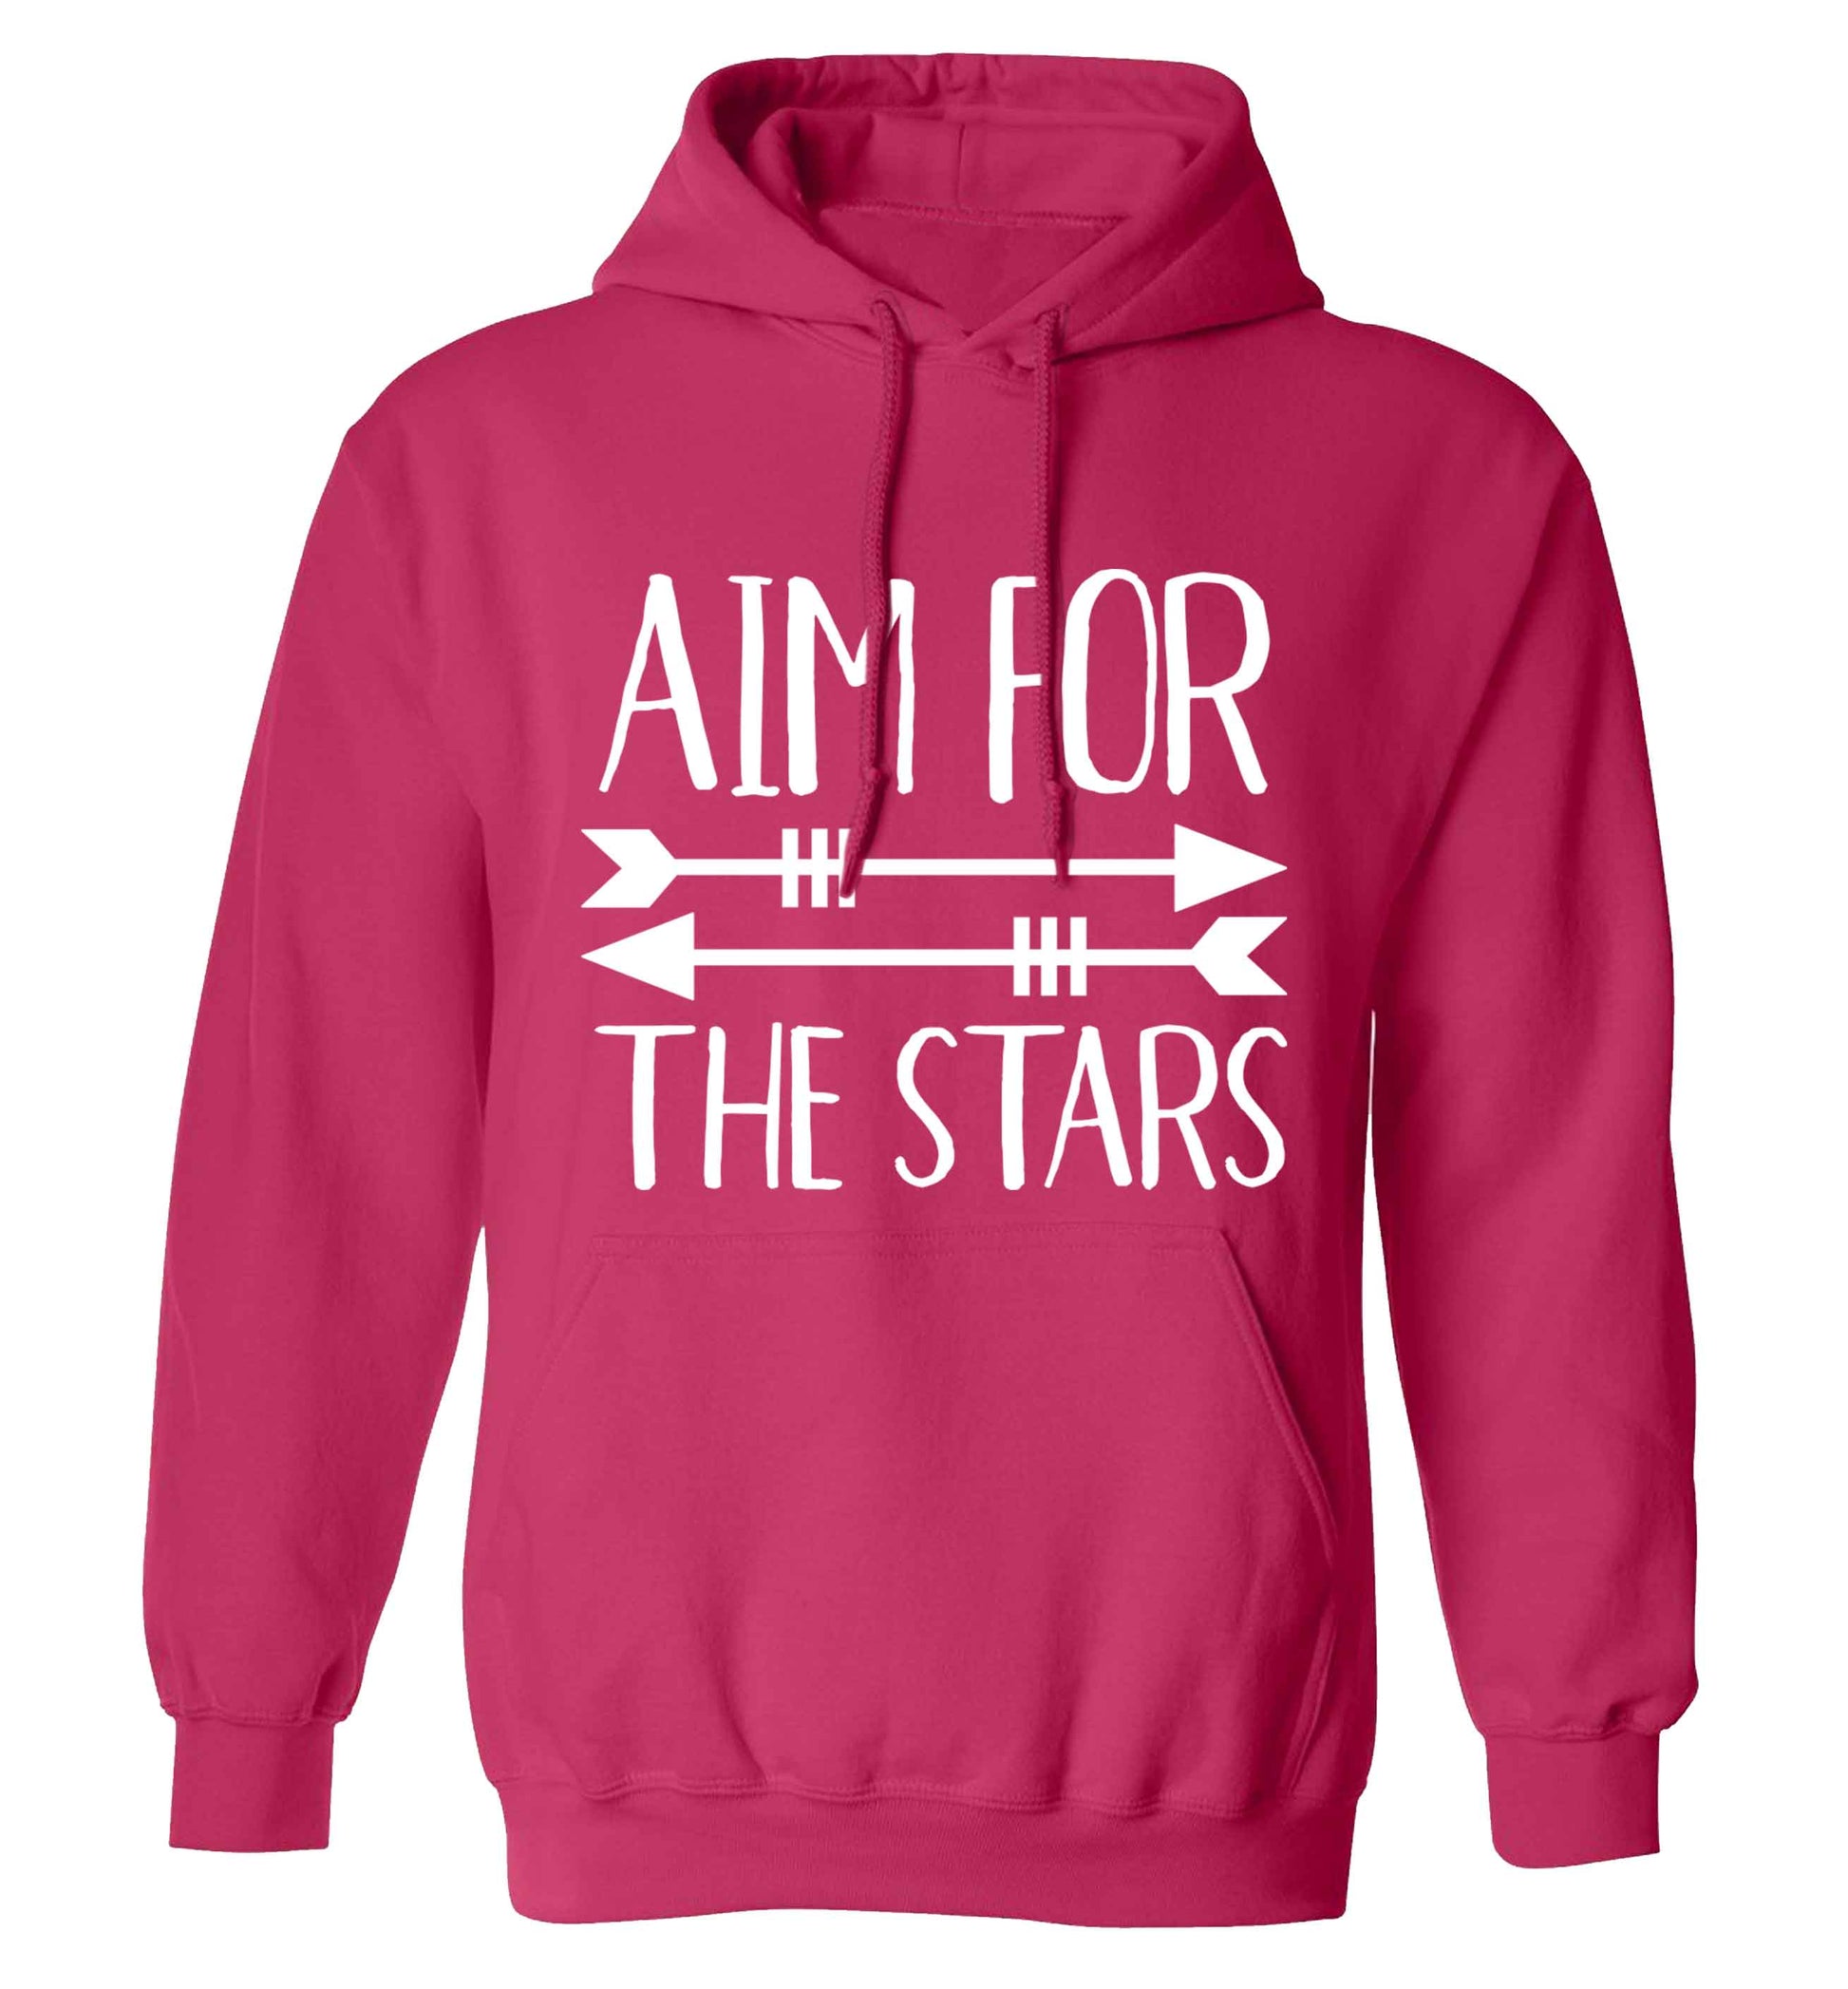 Aim for the stars adults unisex pink hoodie 2XL